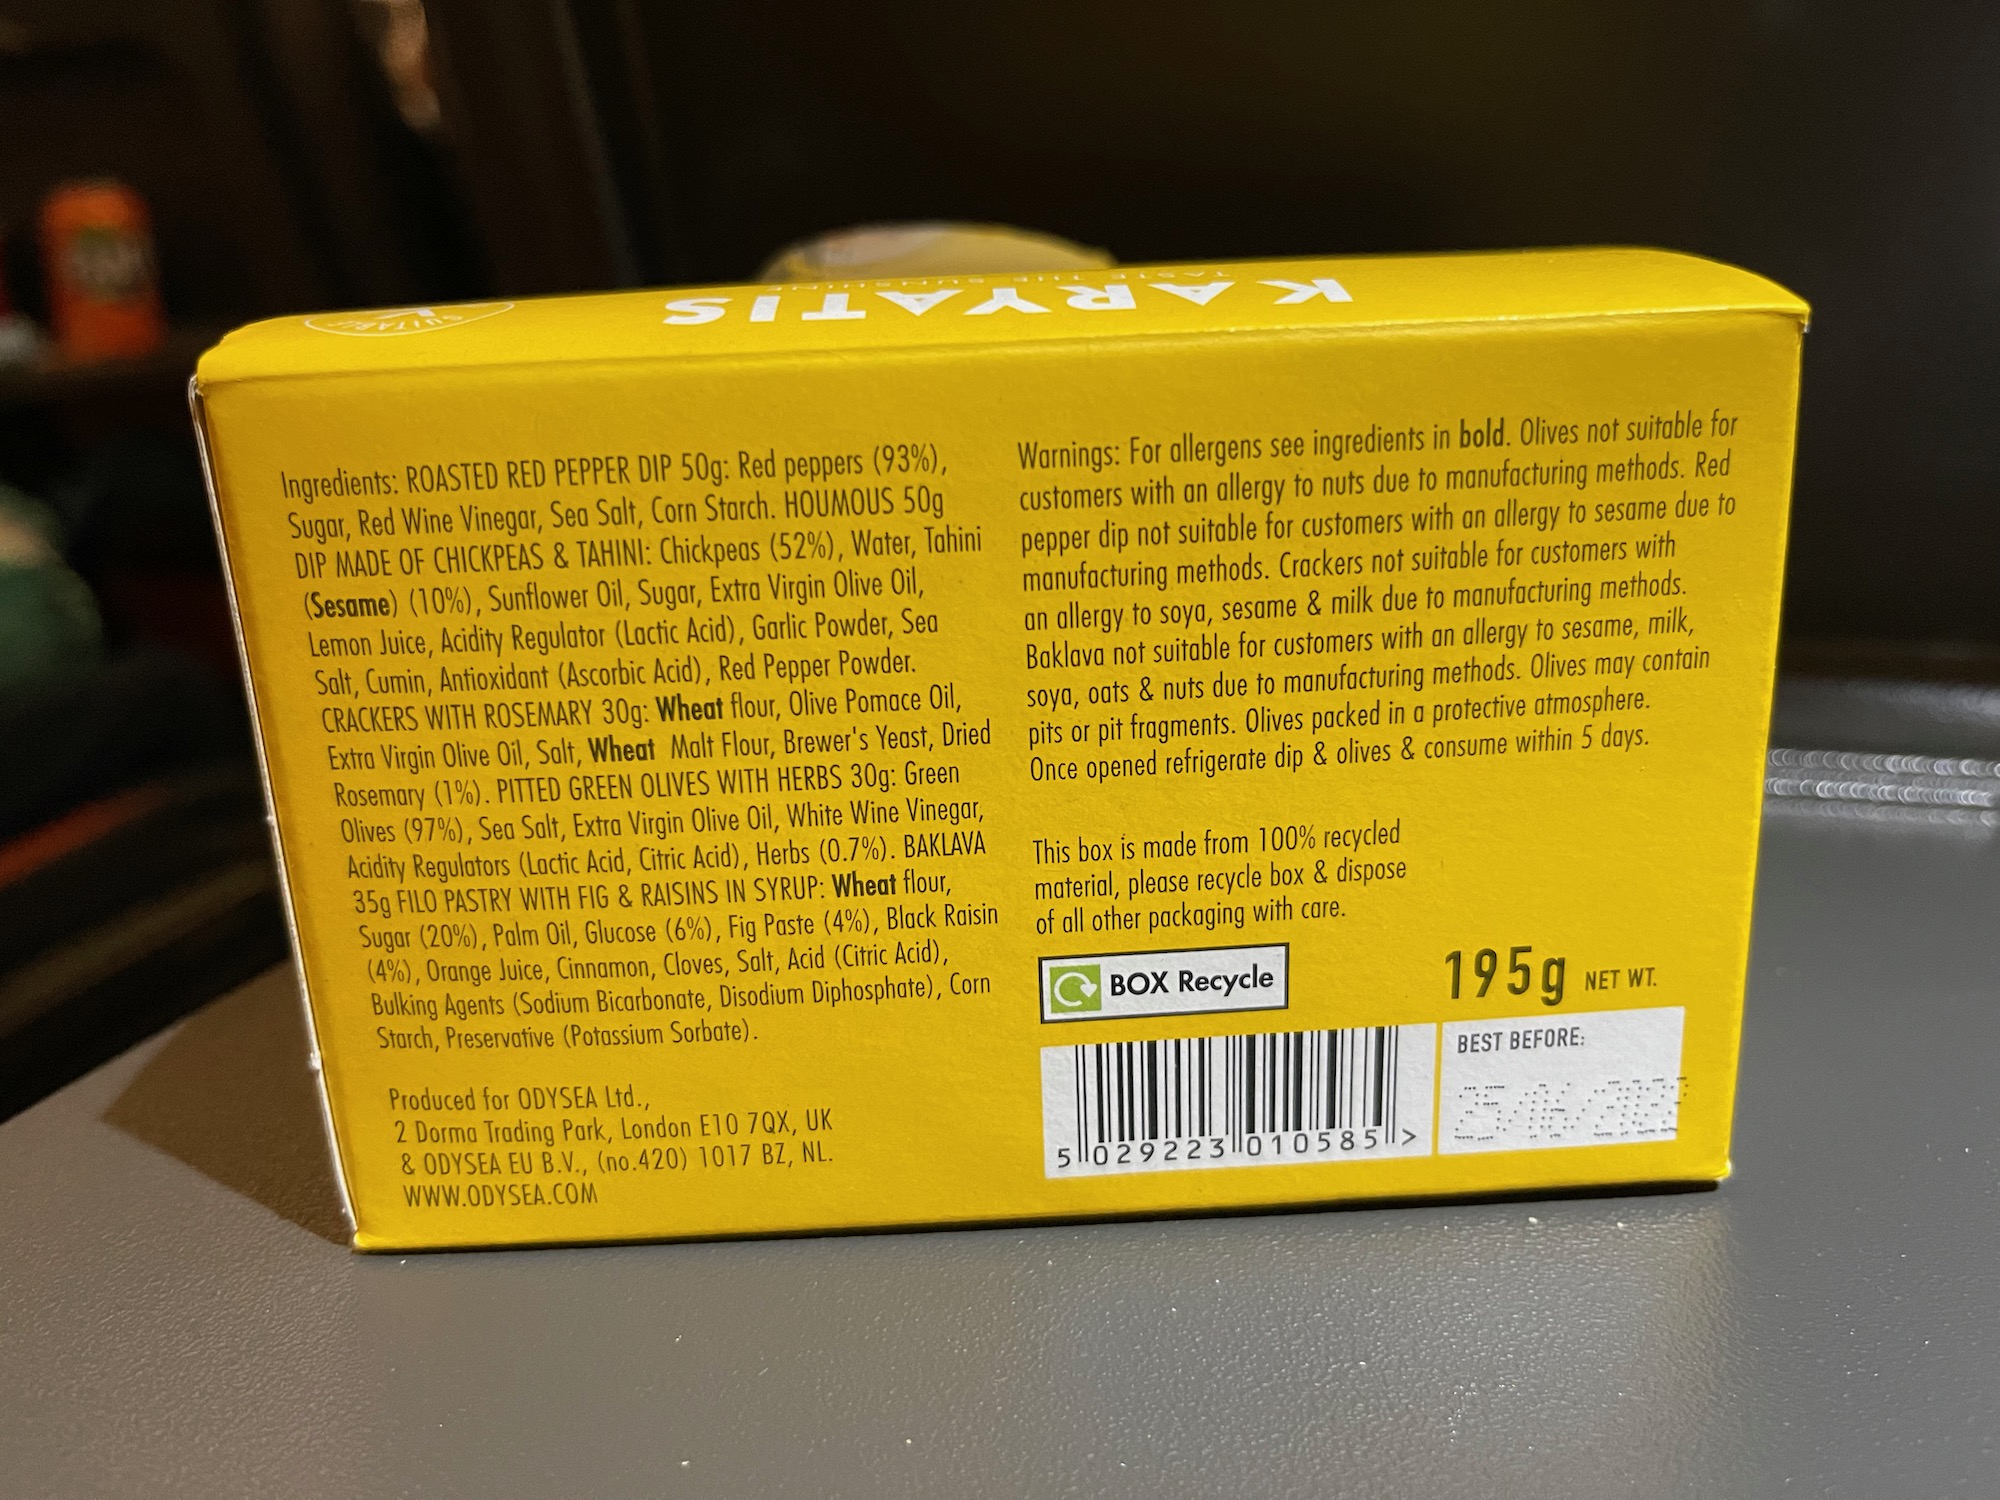 a yellow box with text on it